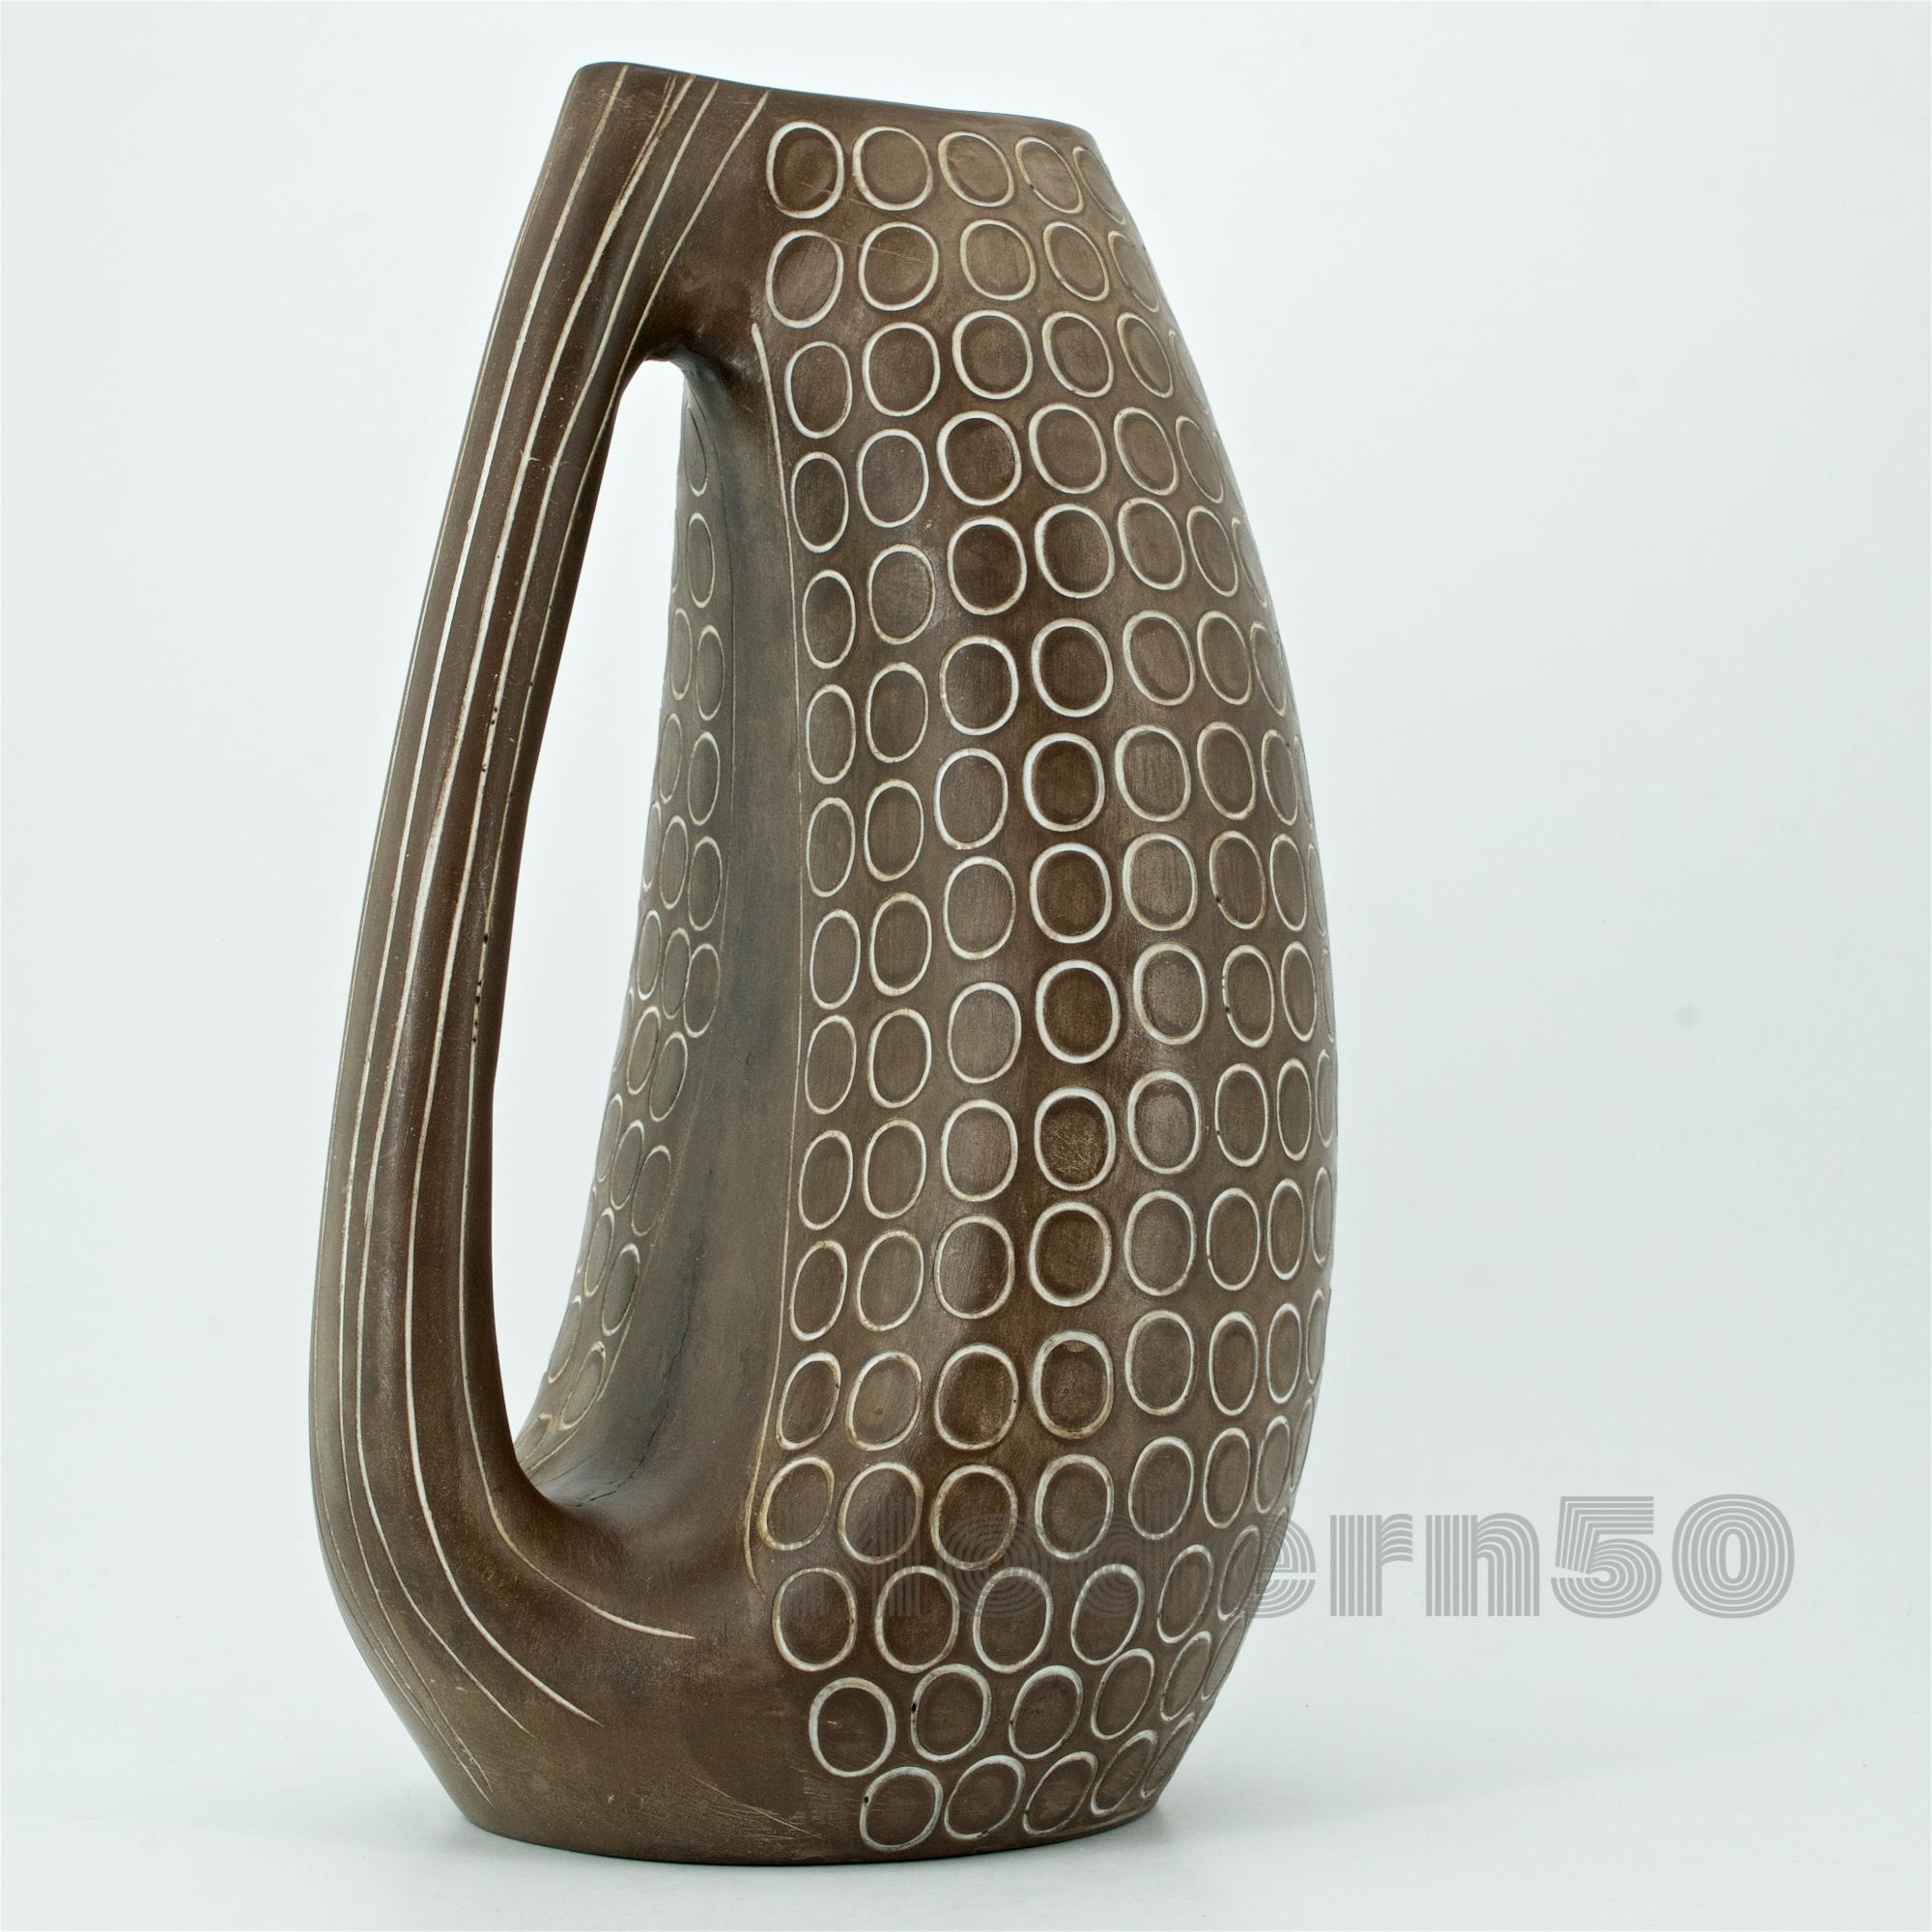 Hand-Crafted 1950s Midcentury Zaccagnini Svedese Pottery Pitcher Vase Geometric Organic Italy For Sale